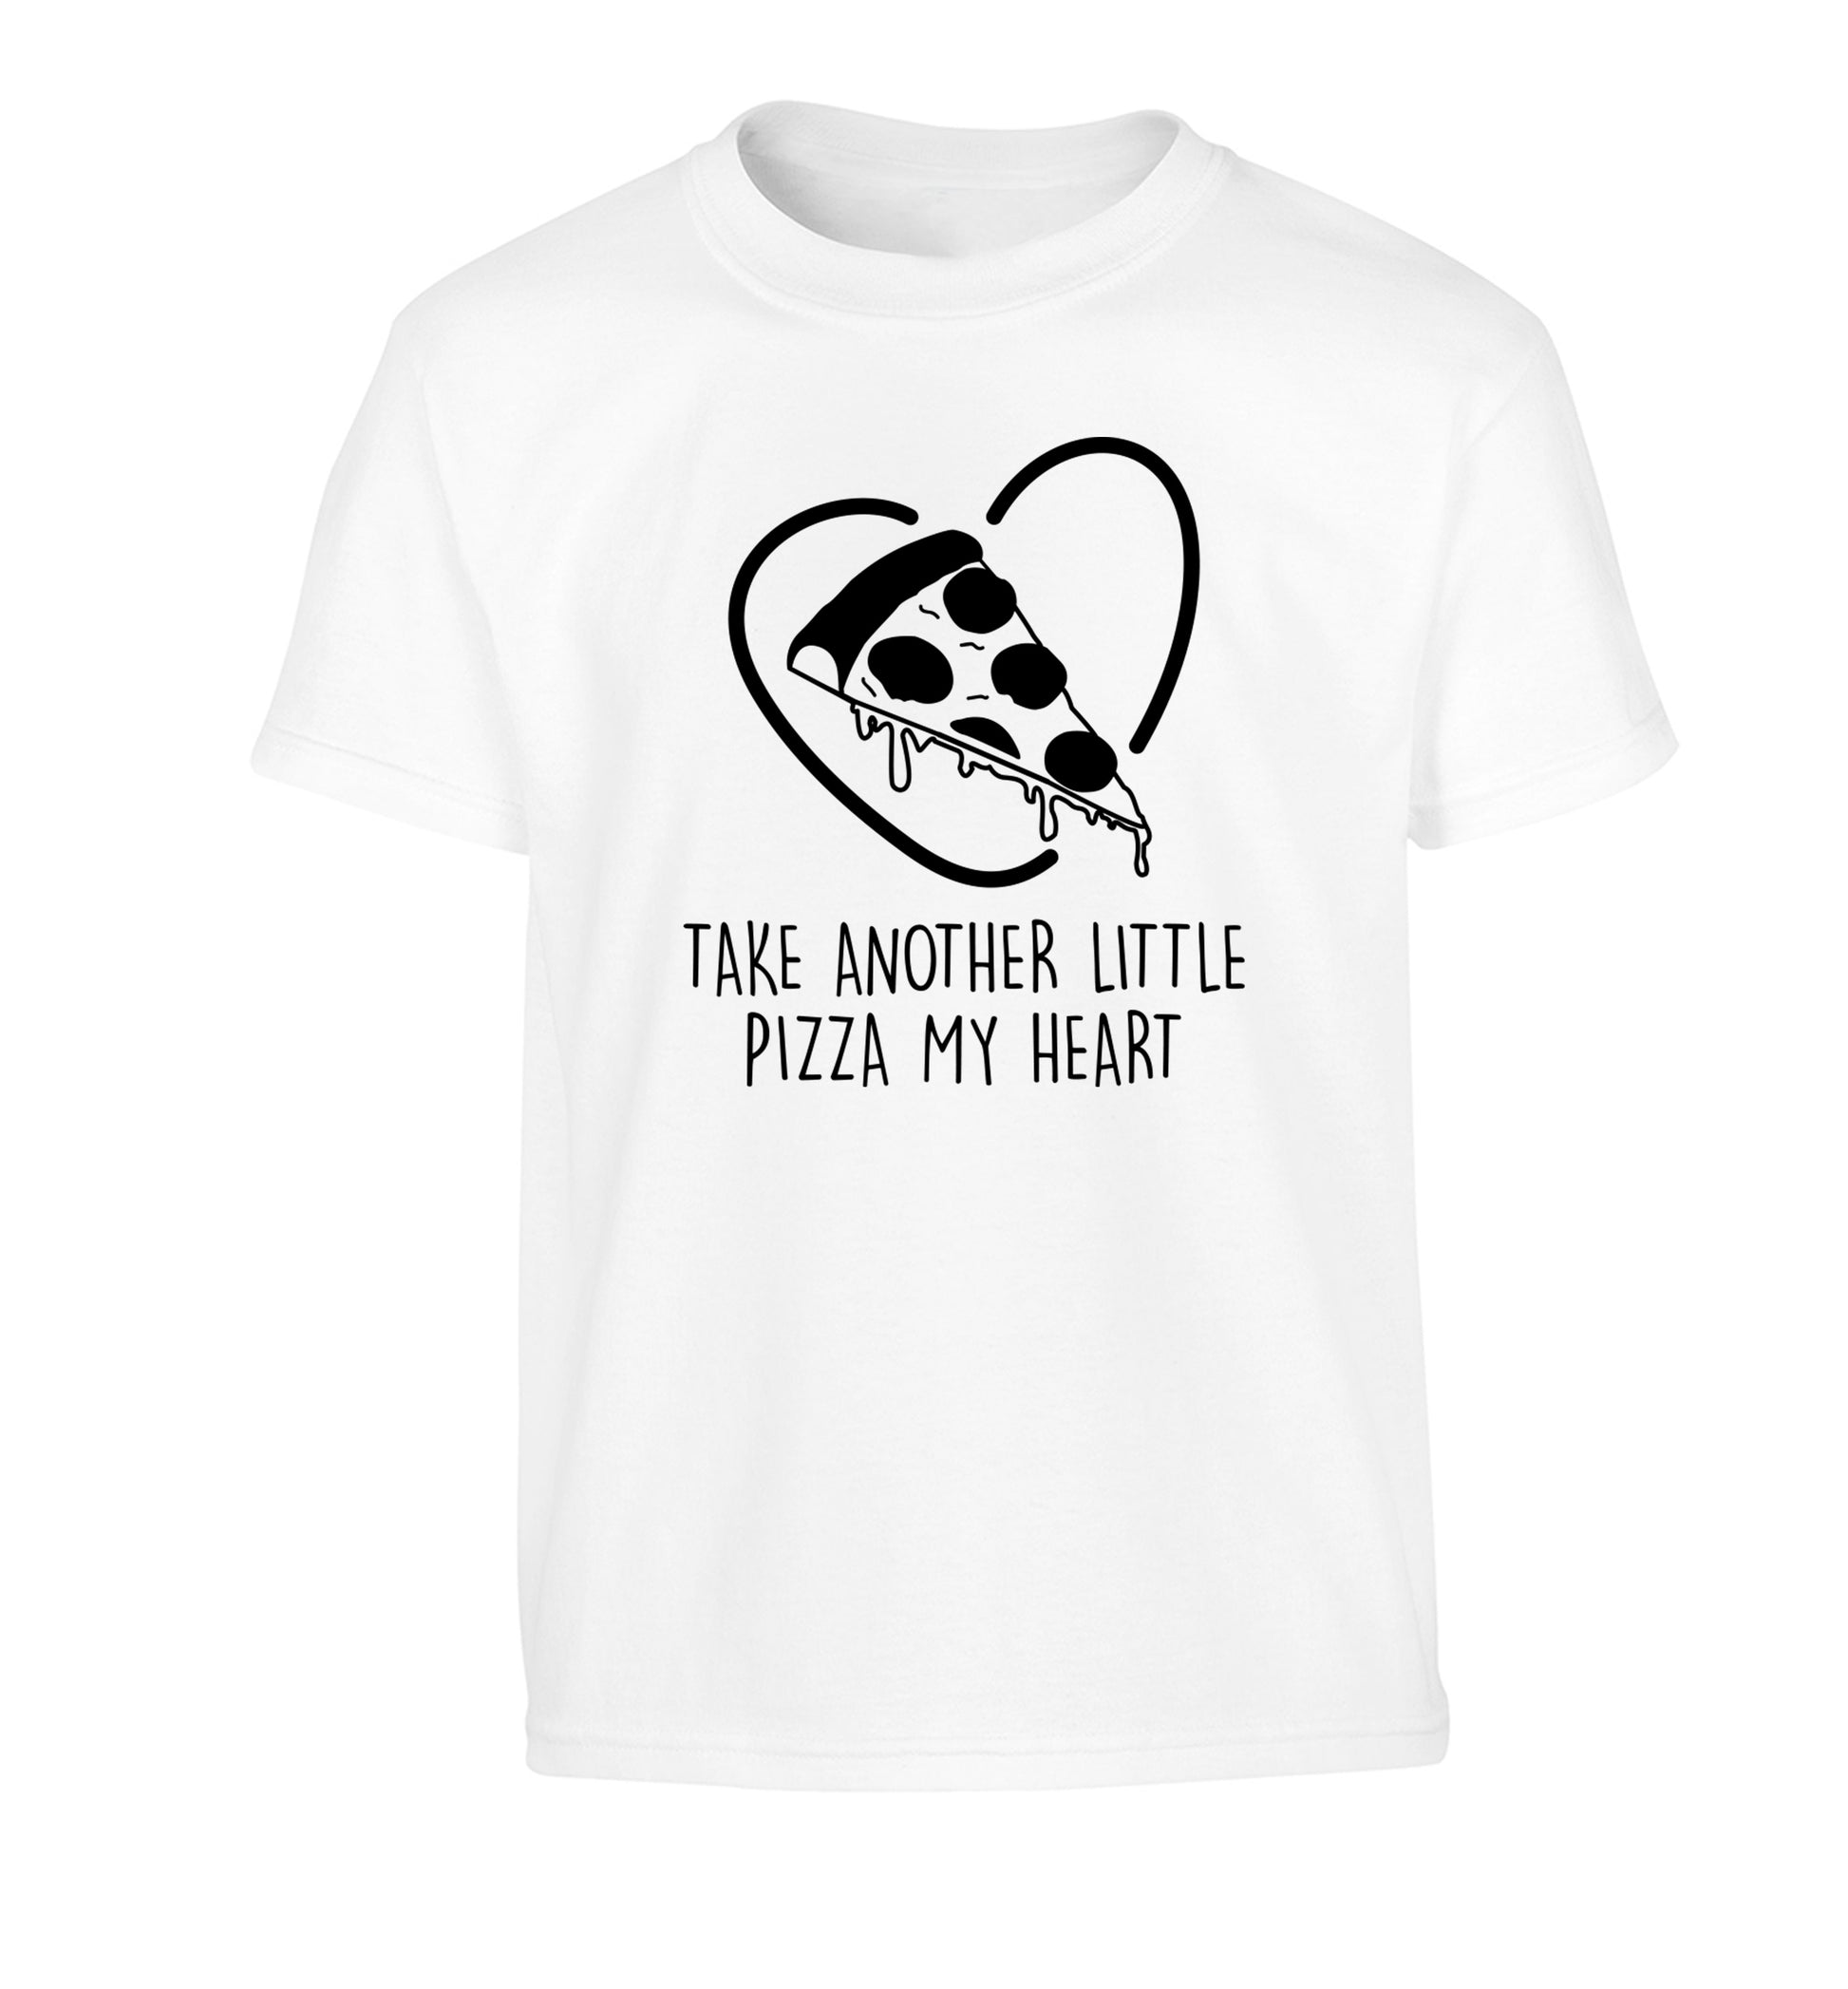 Take another little pizza my heart Children's white Tshirt 12-13 Years